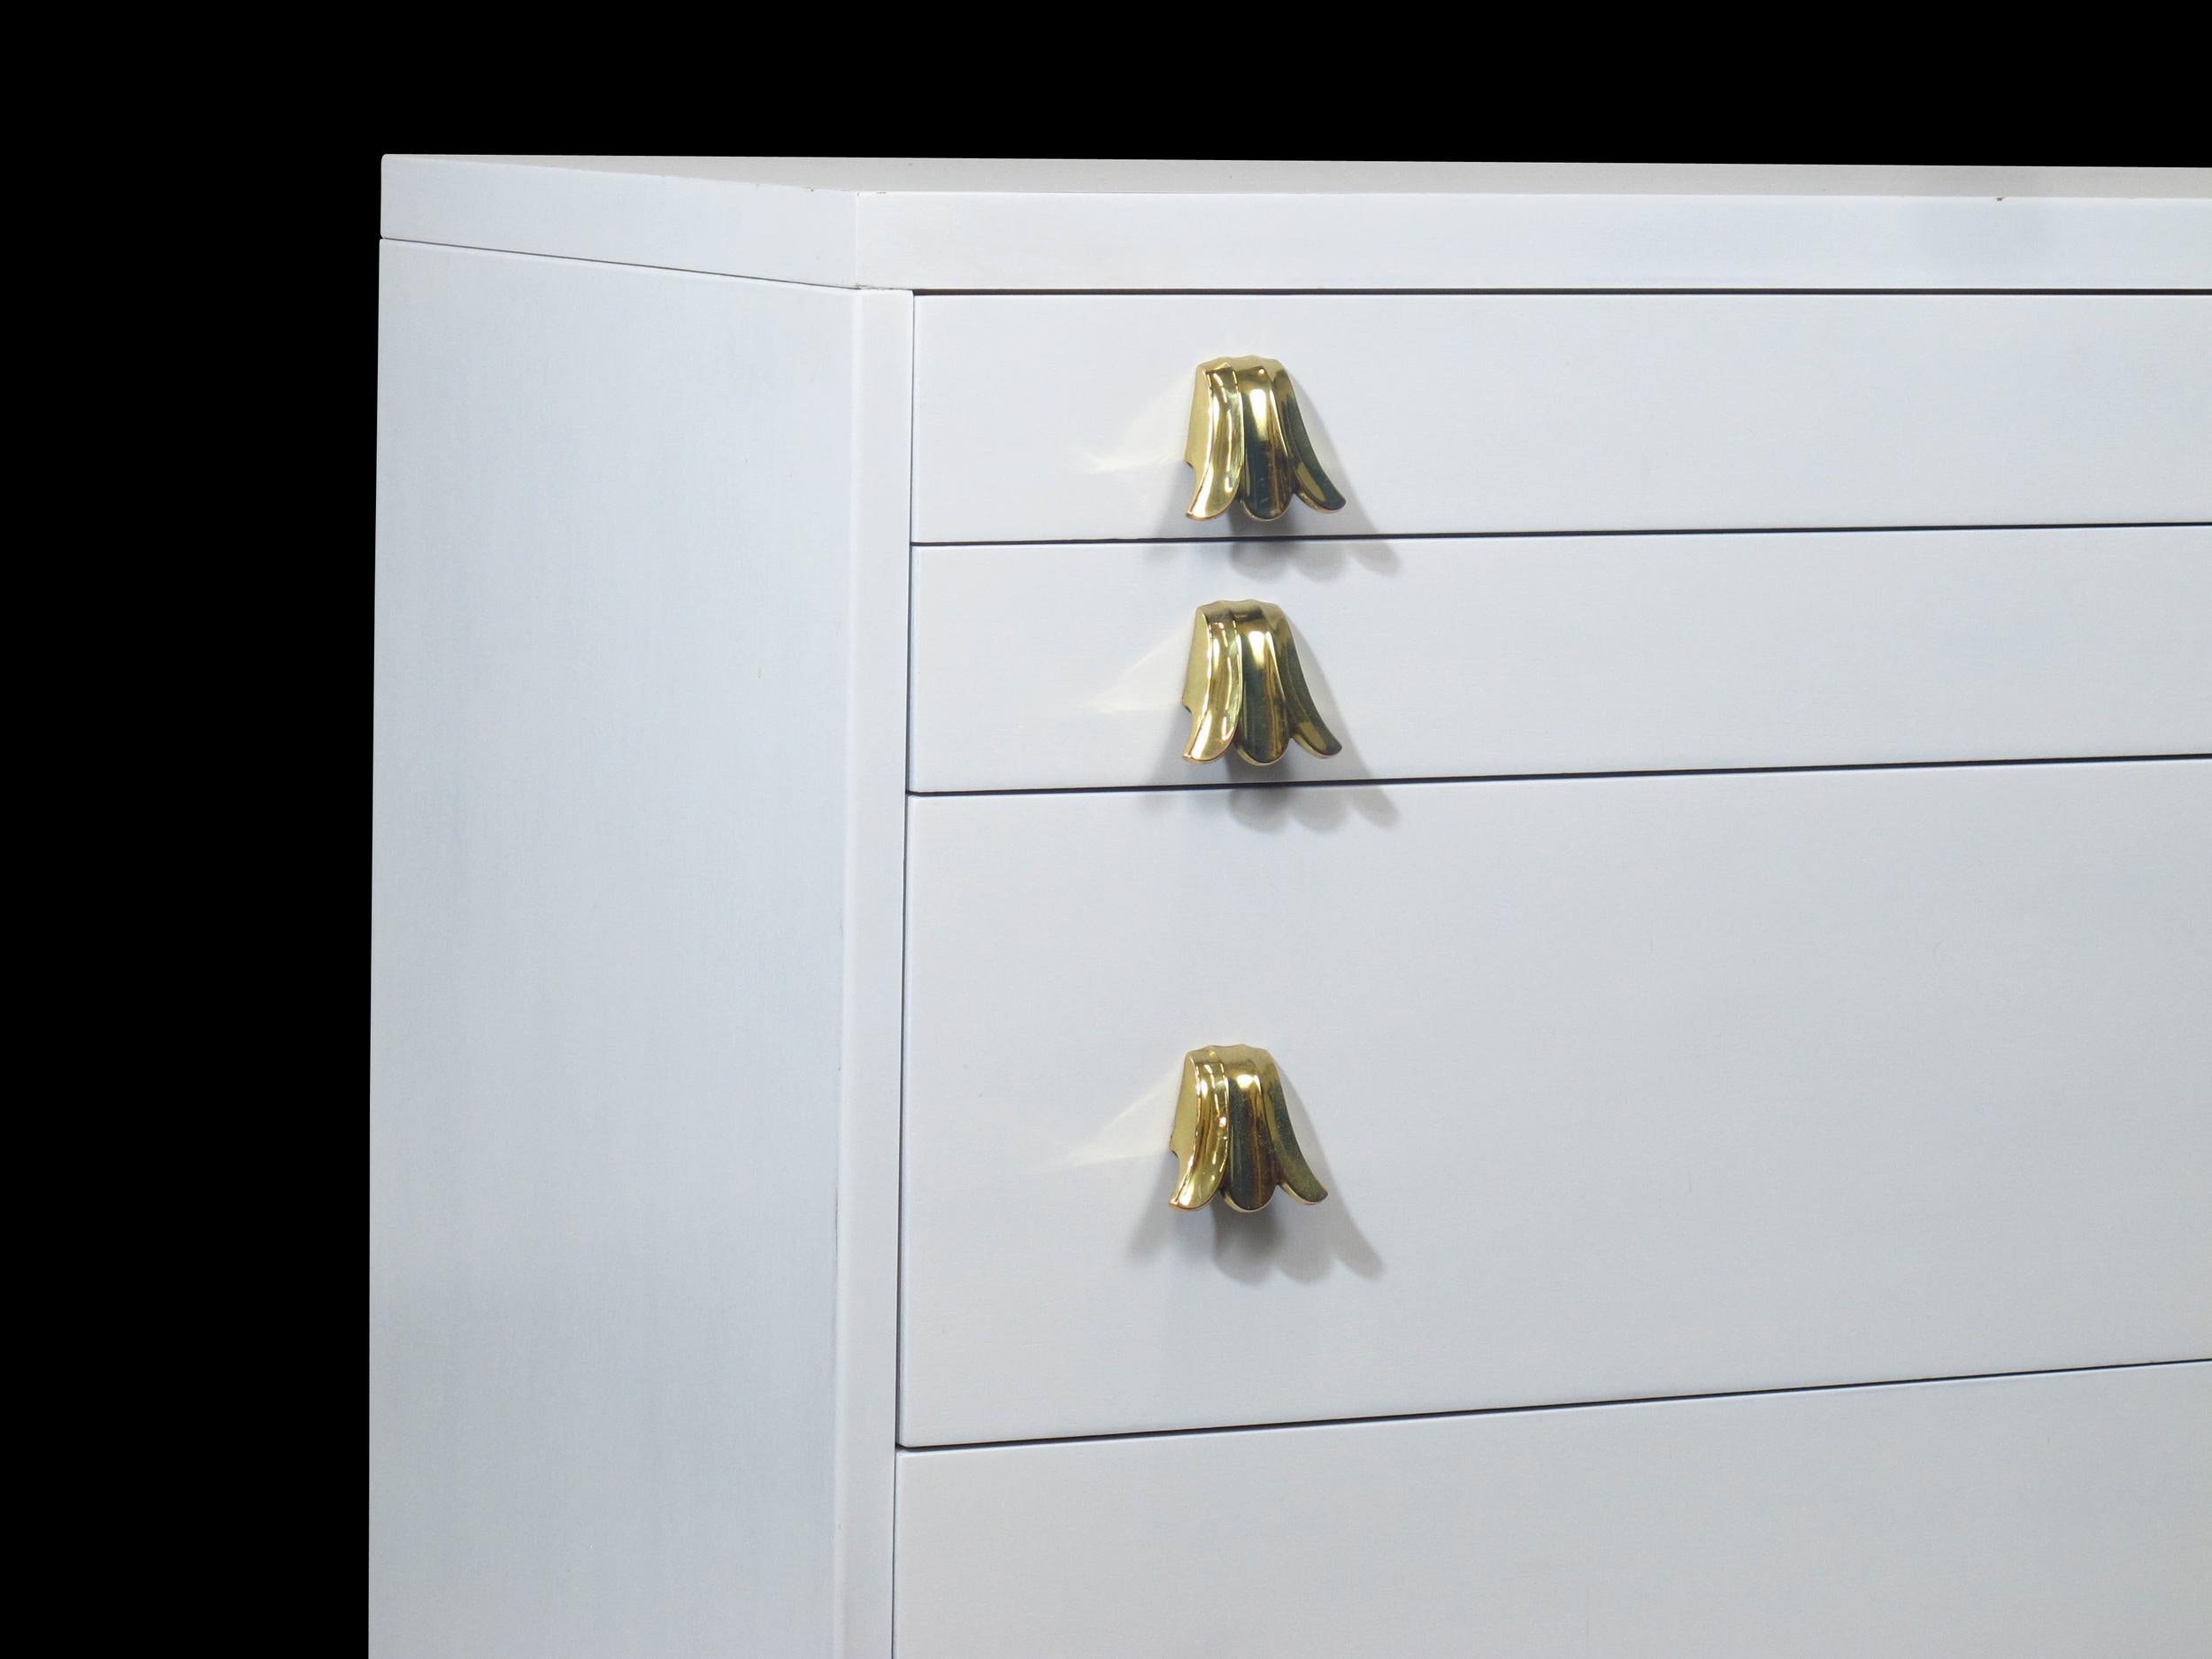 Mid-Century Modern chest of drawer cabinet designed by C.G. Kimerly for Widdicomb finished in a white lacquer with brass plated flower shaped drawer pulls.